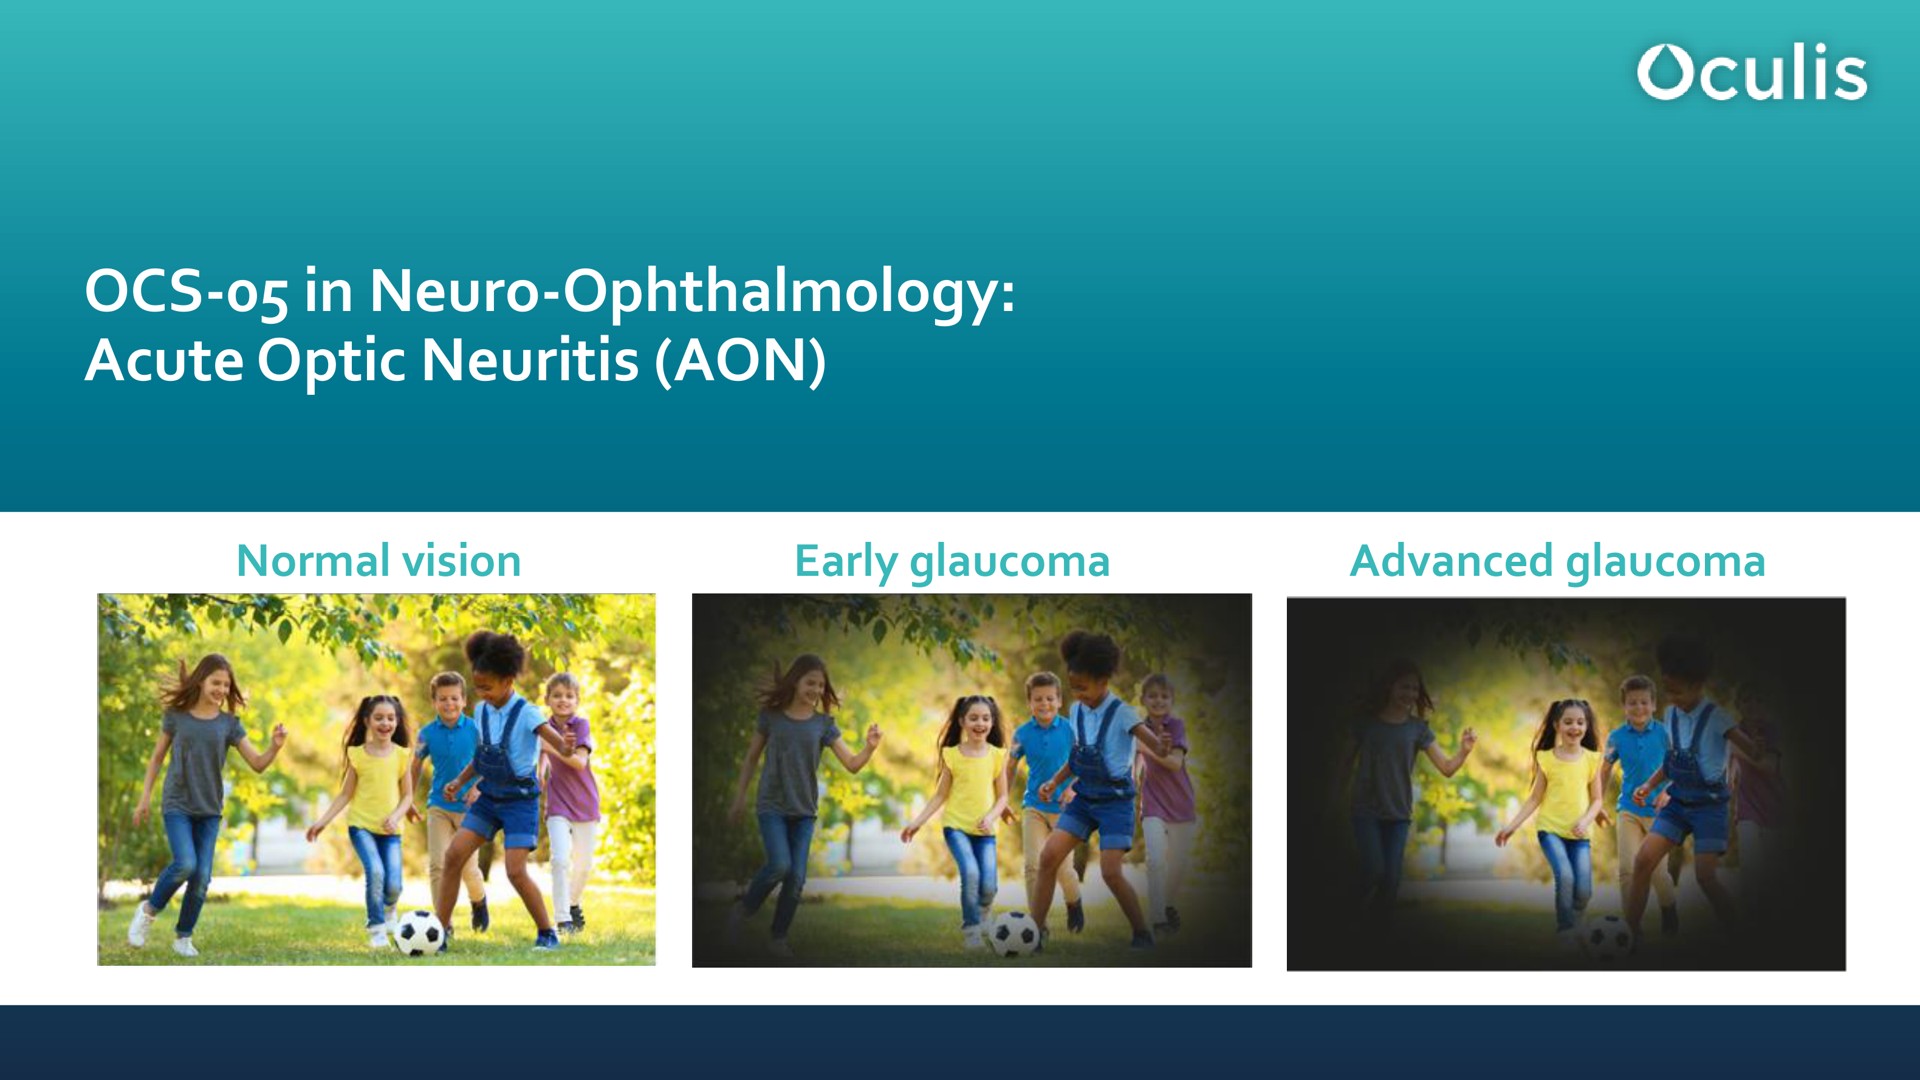 in ophthalmology acute optic neuritis normal vision early glaucoma advanced glaucoma | Oculis